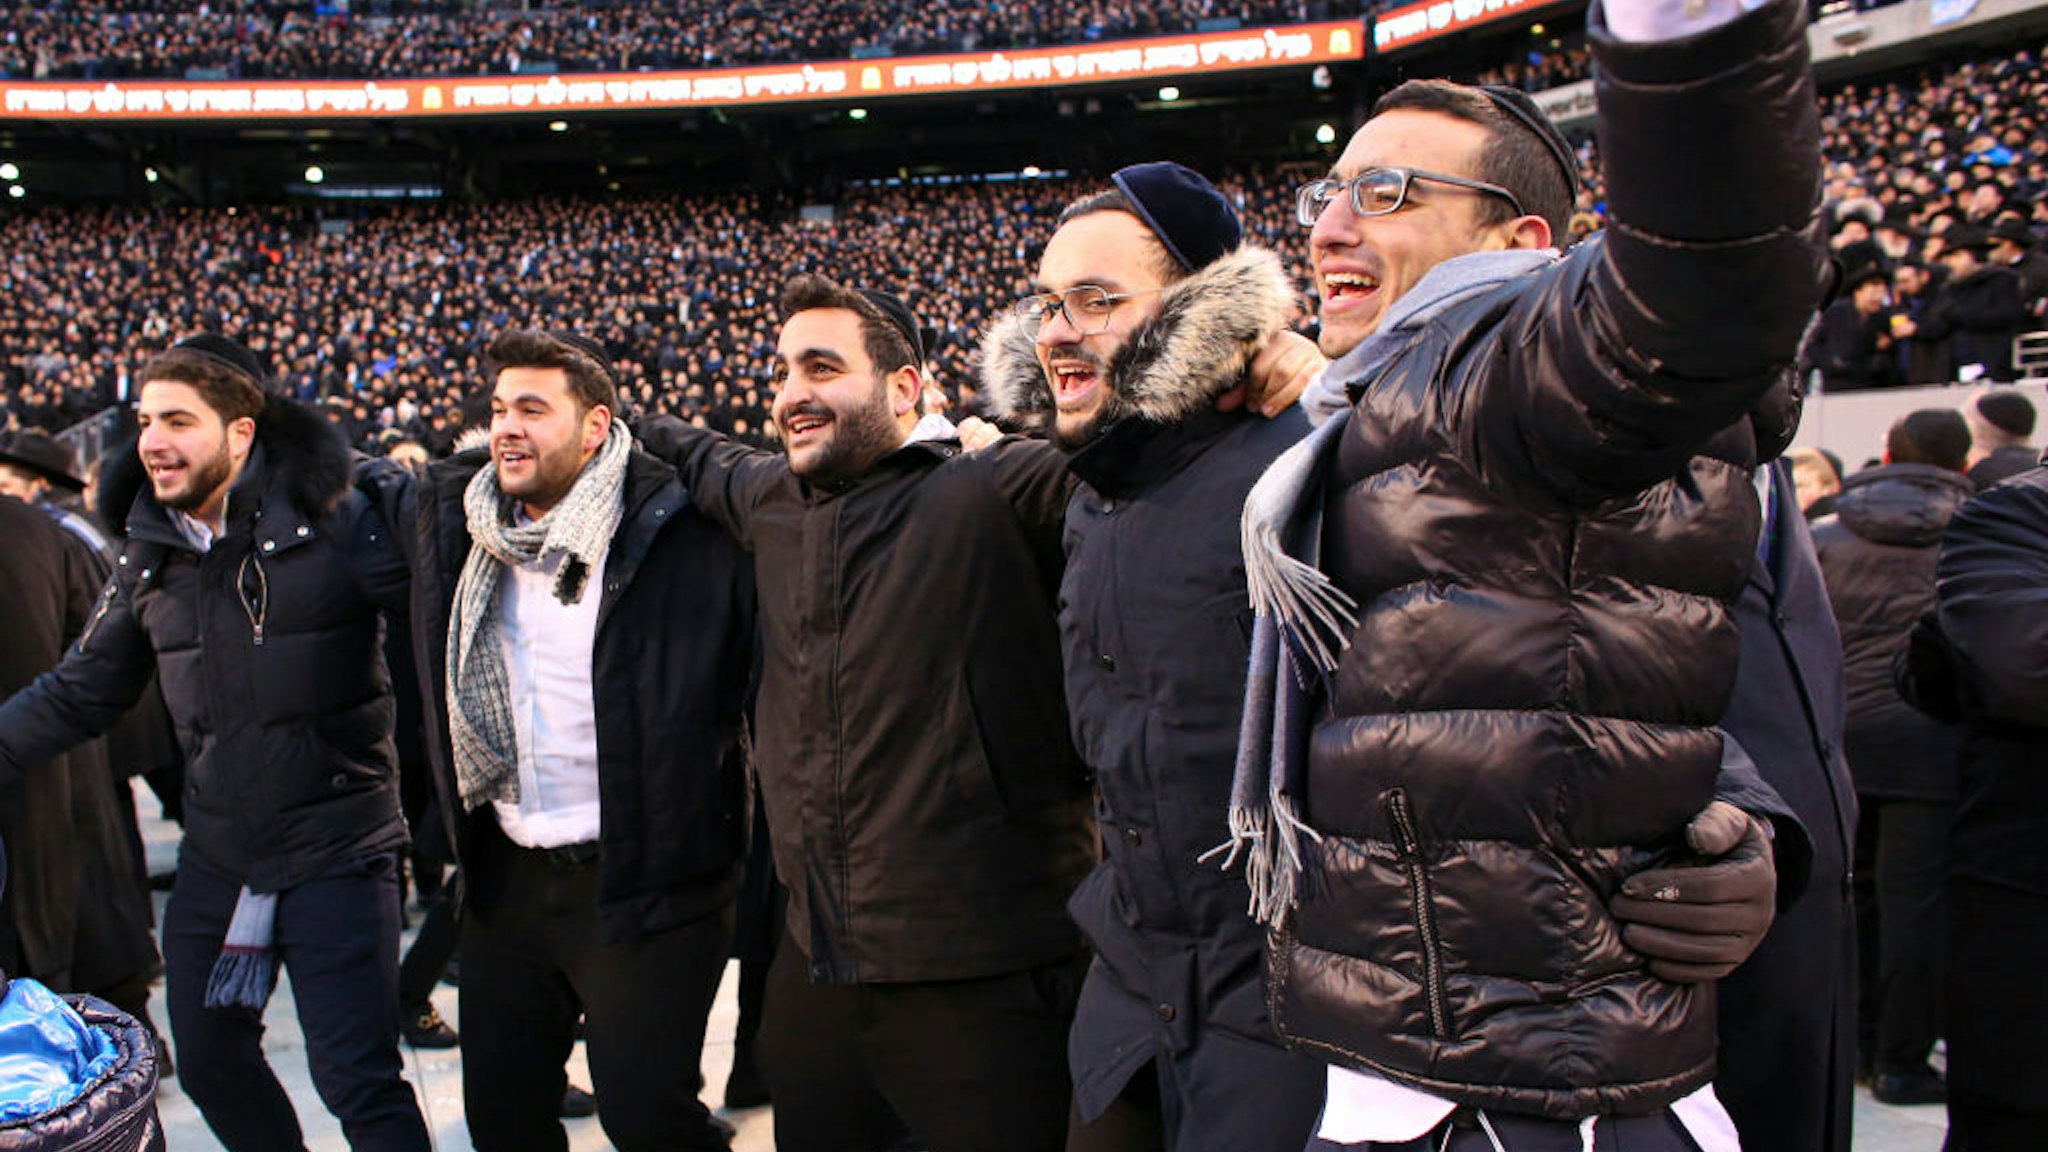 Men dance as they celebrate Siyum HaShas, the completion of the reading of the Babylonian Talmud, at the MetLife Stadium on January 1, 2020, in East Rutherford, New Jersey.